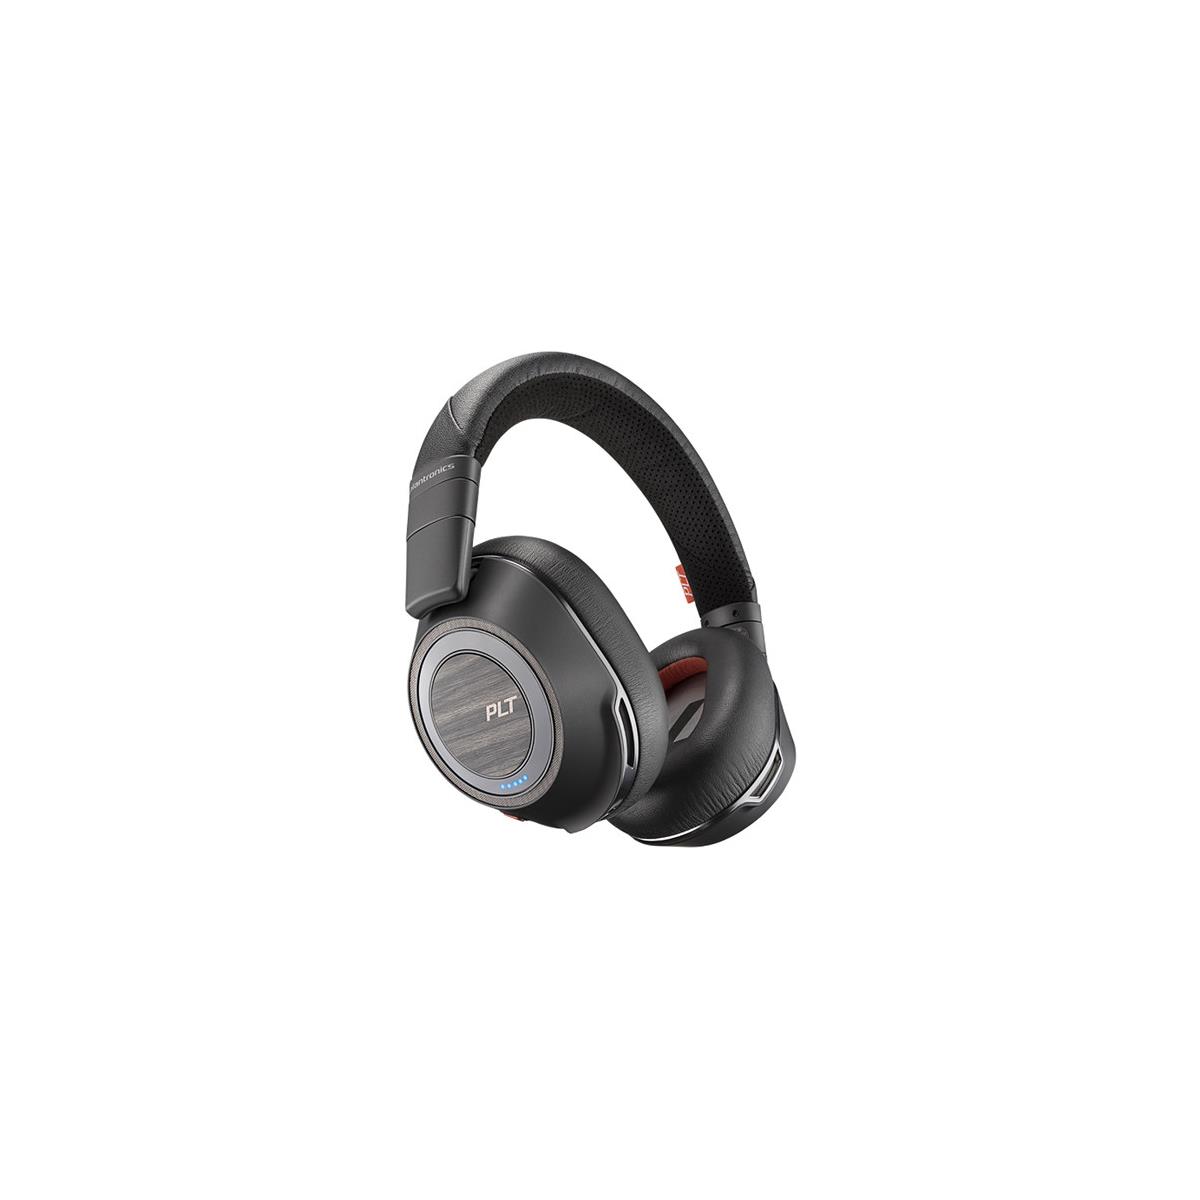 Image of Plantronics Voyager 8200 UC Over-Ear Stereo Bluetooth Headset